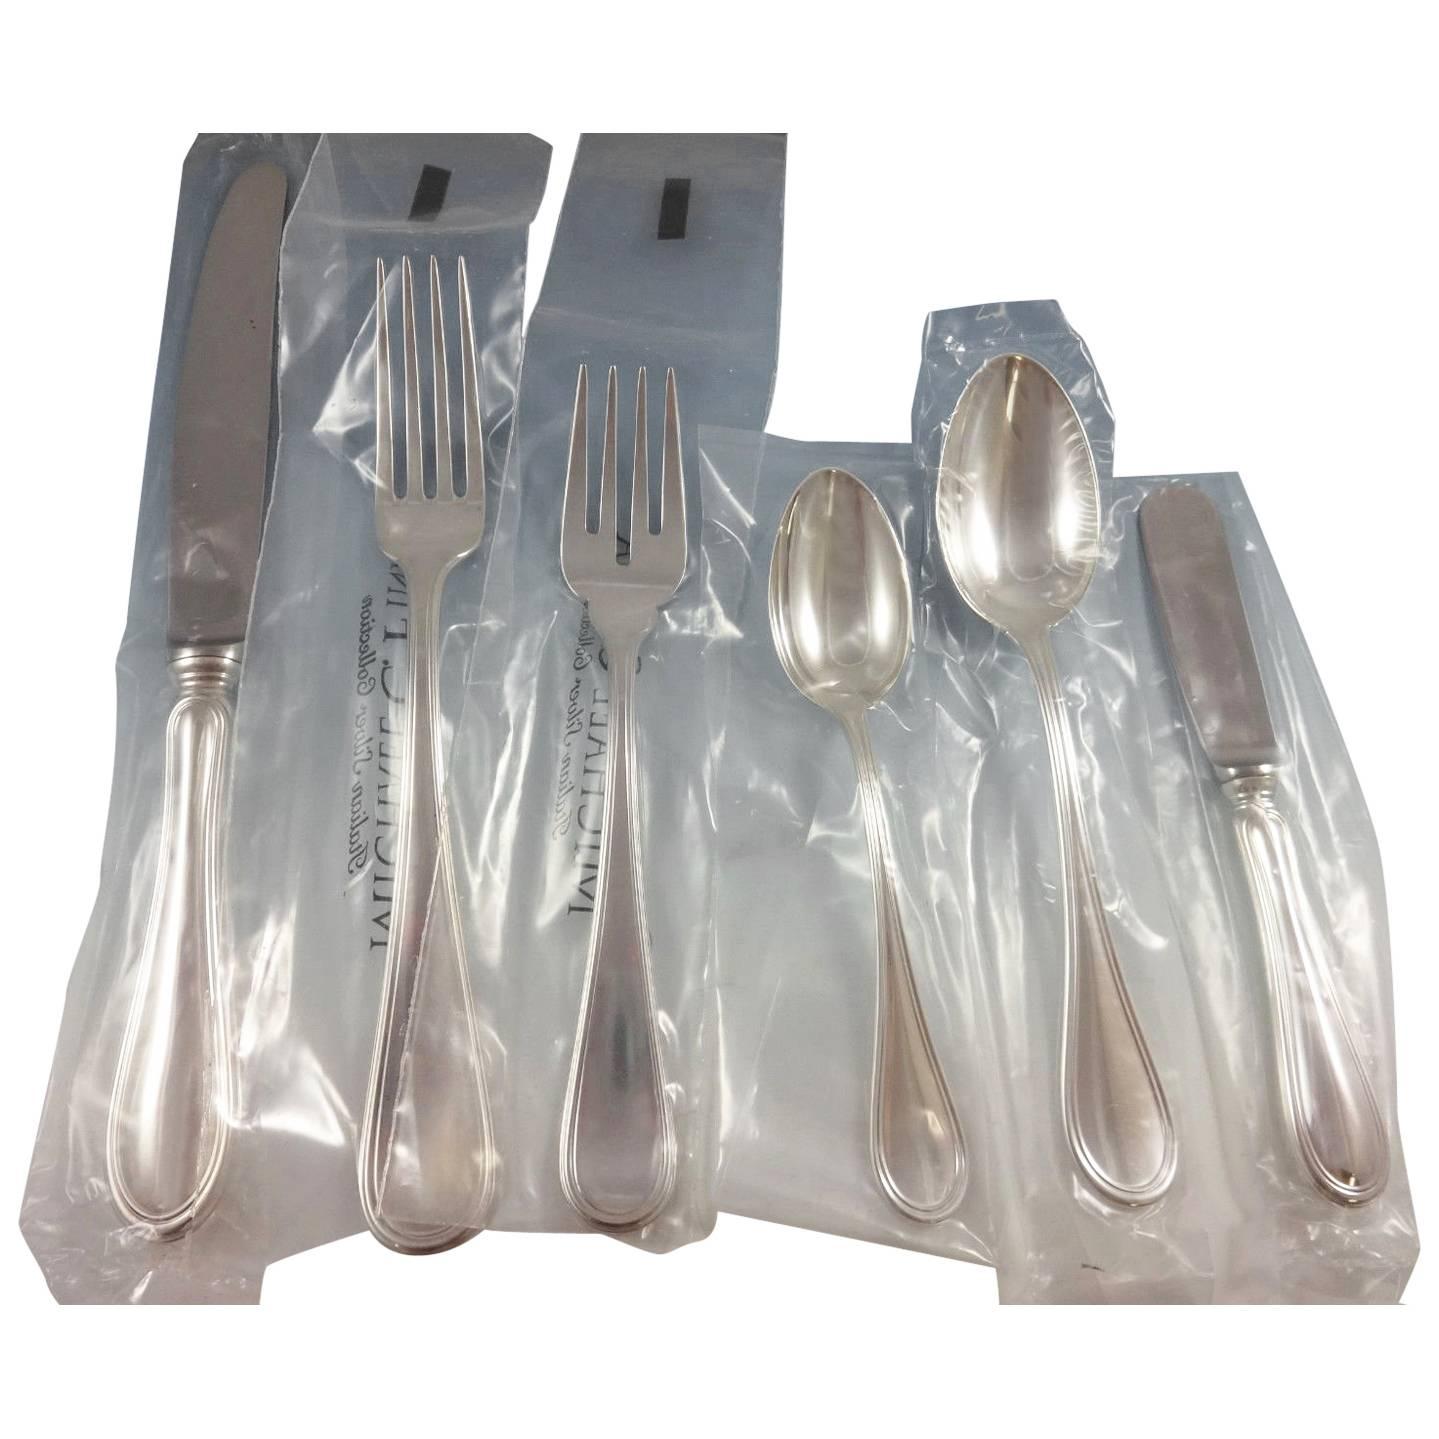 Giorgio by Fina Italy Sterling Silver Flatware Dinner Set 12 Service 77-PC New